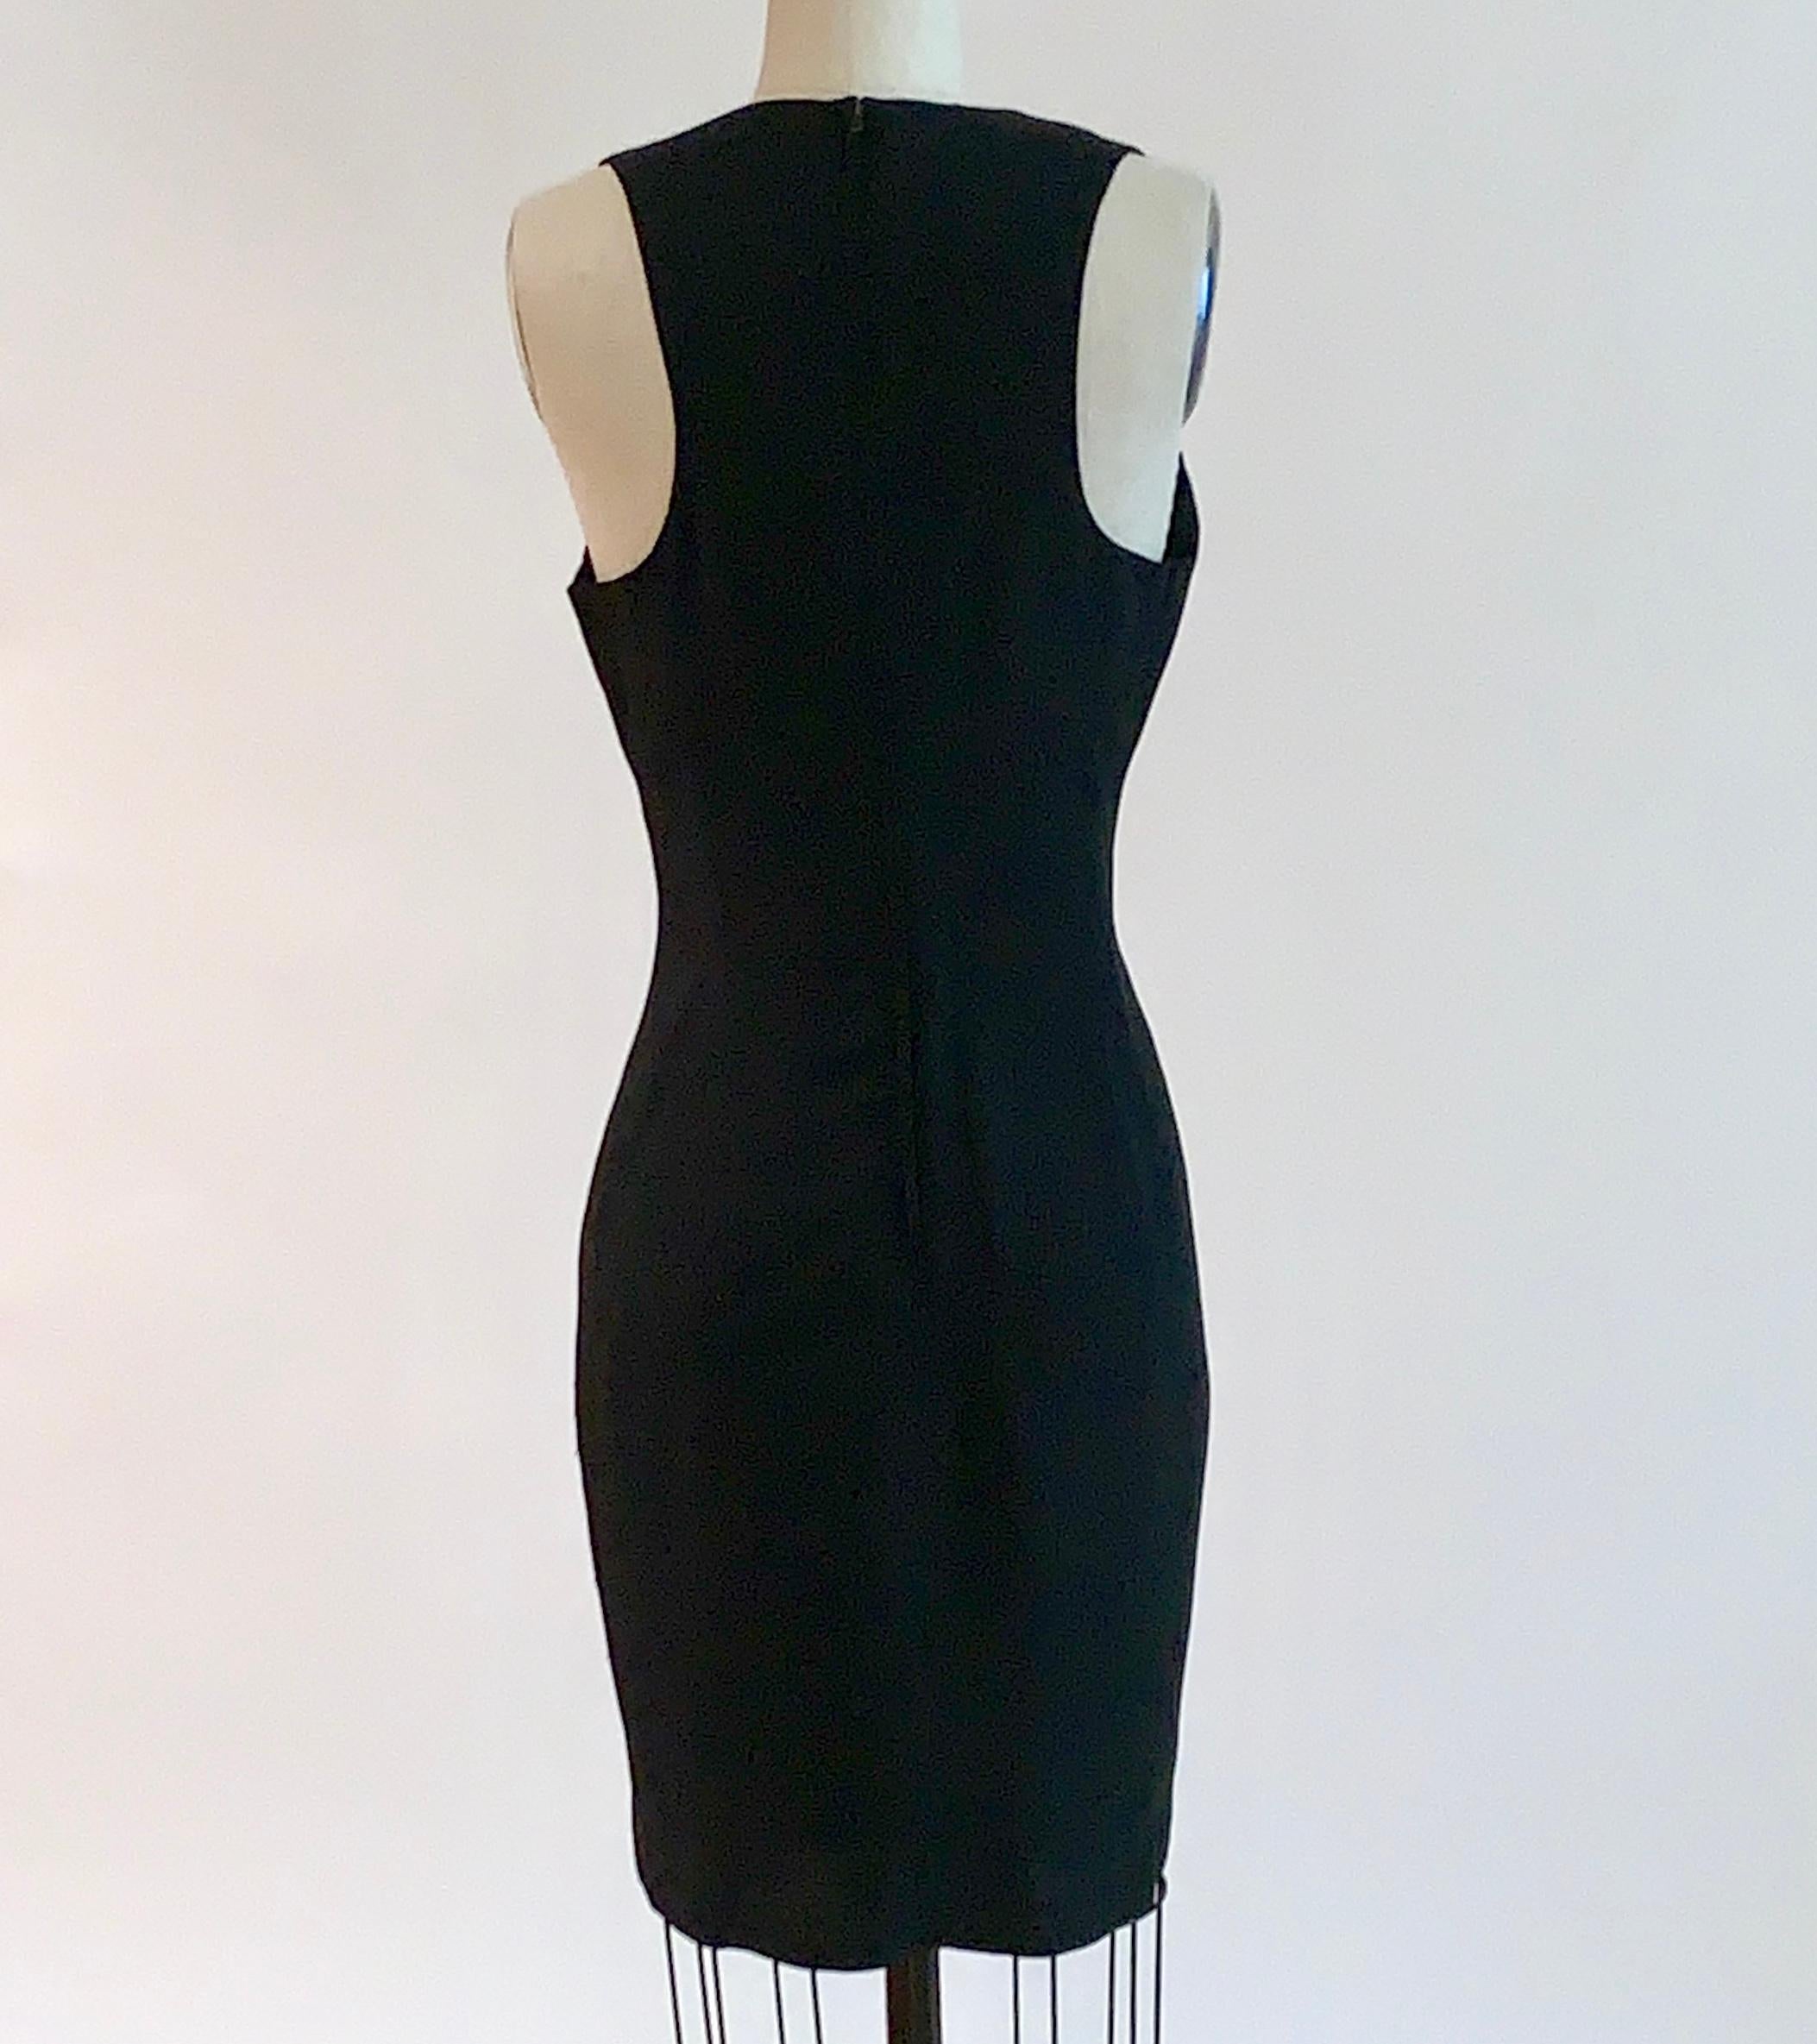 Women's 1990s Moschino 4 Your Eyes Only Peekaboo Black and Gold Pencil Dress